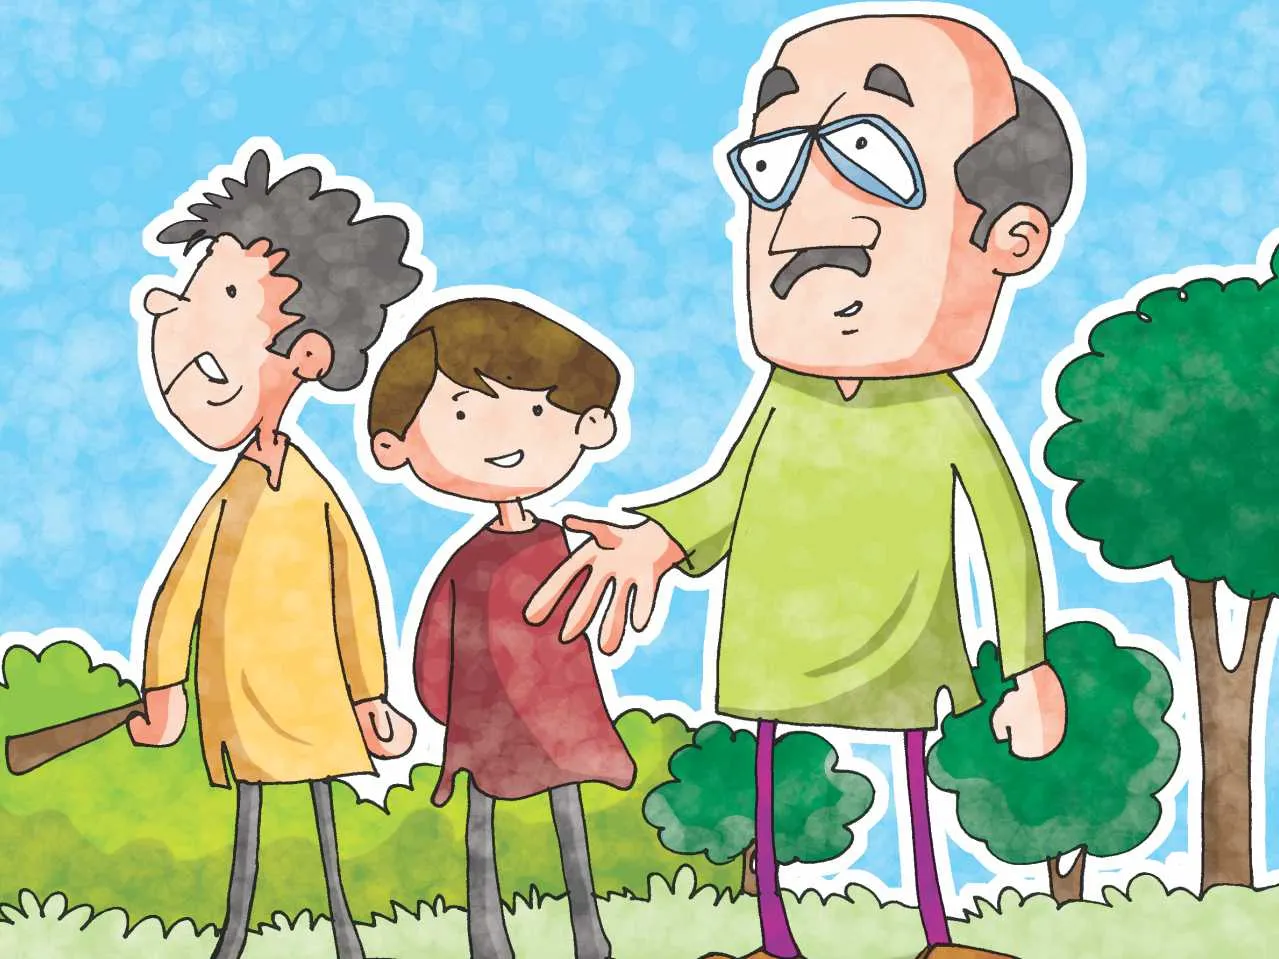 Two kids and their father cartoon image